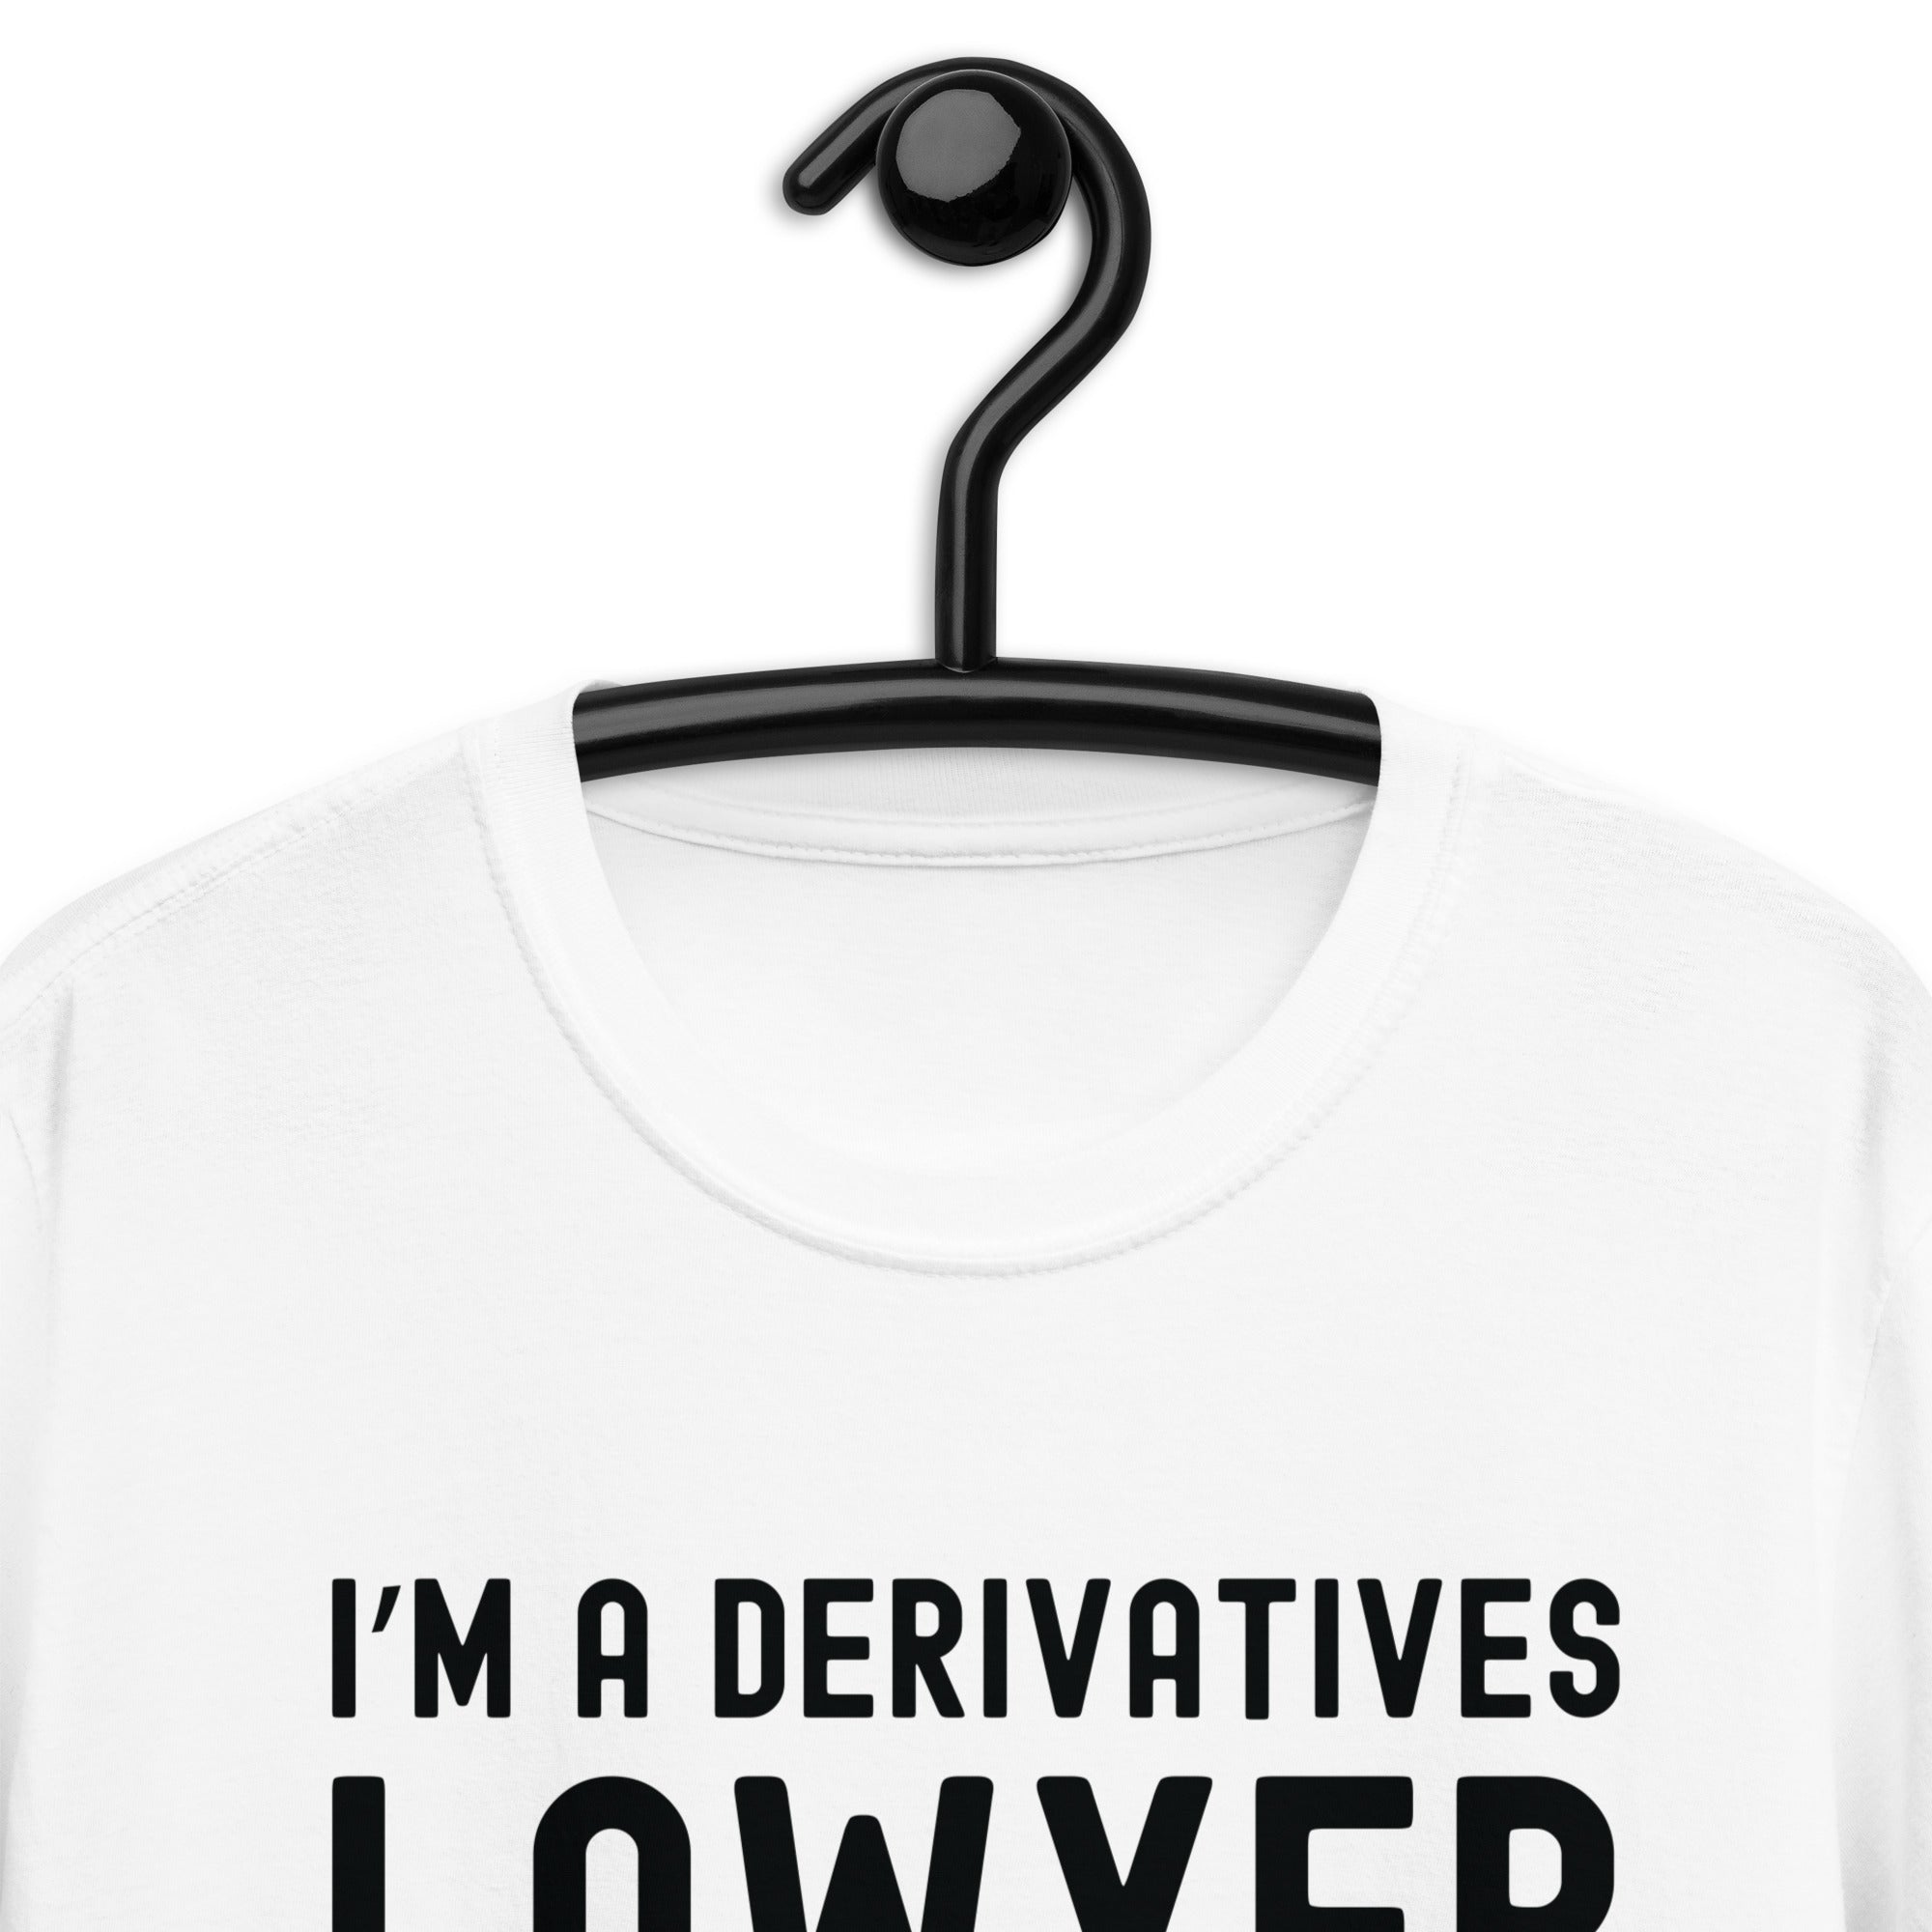 Short-Sleeve Unisex T-Shirt | I’m a derivatives lawyer, what’s your superpower?